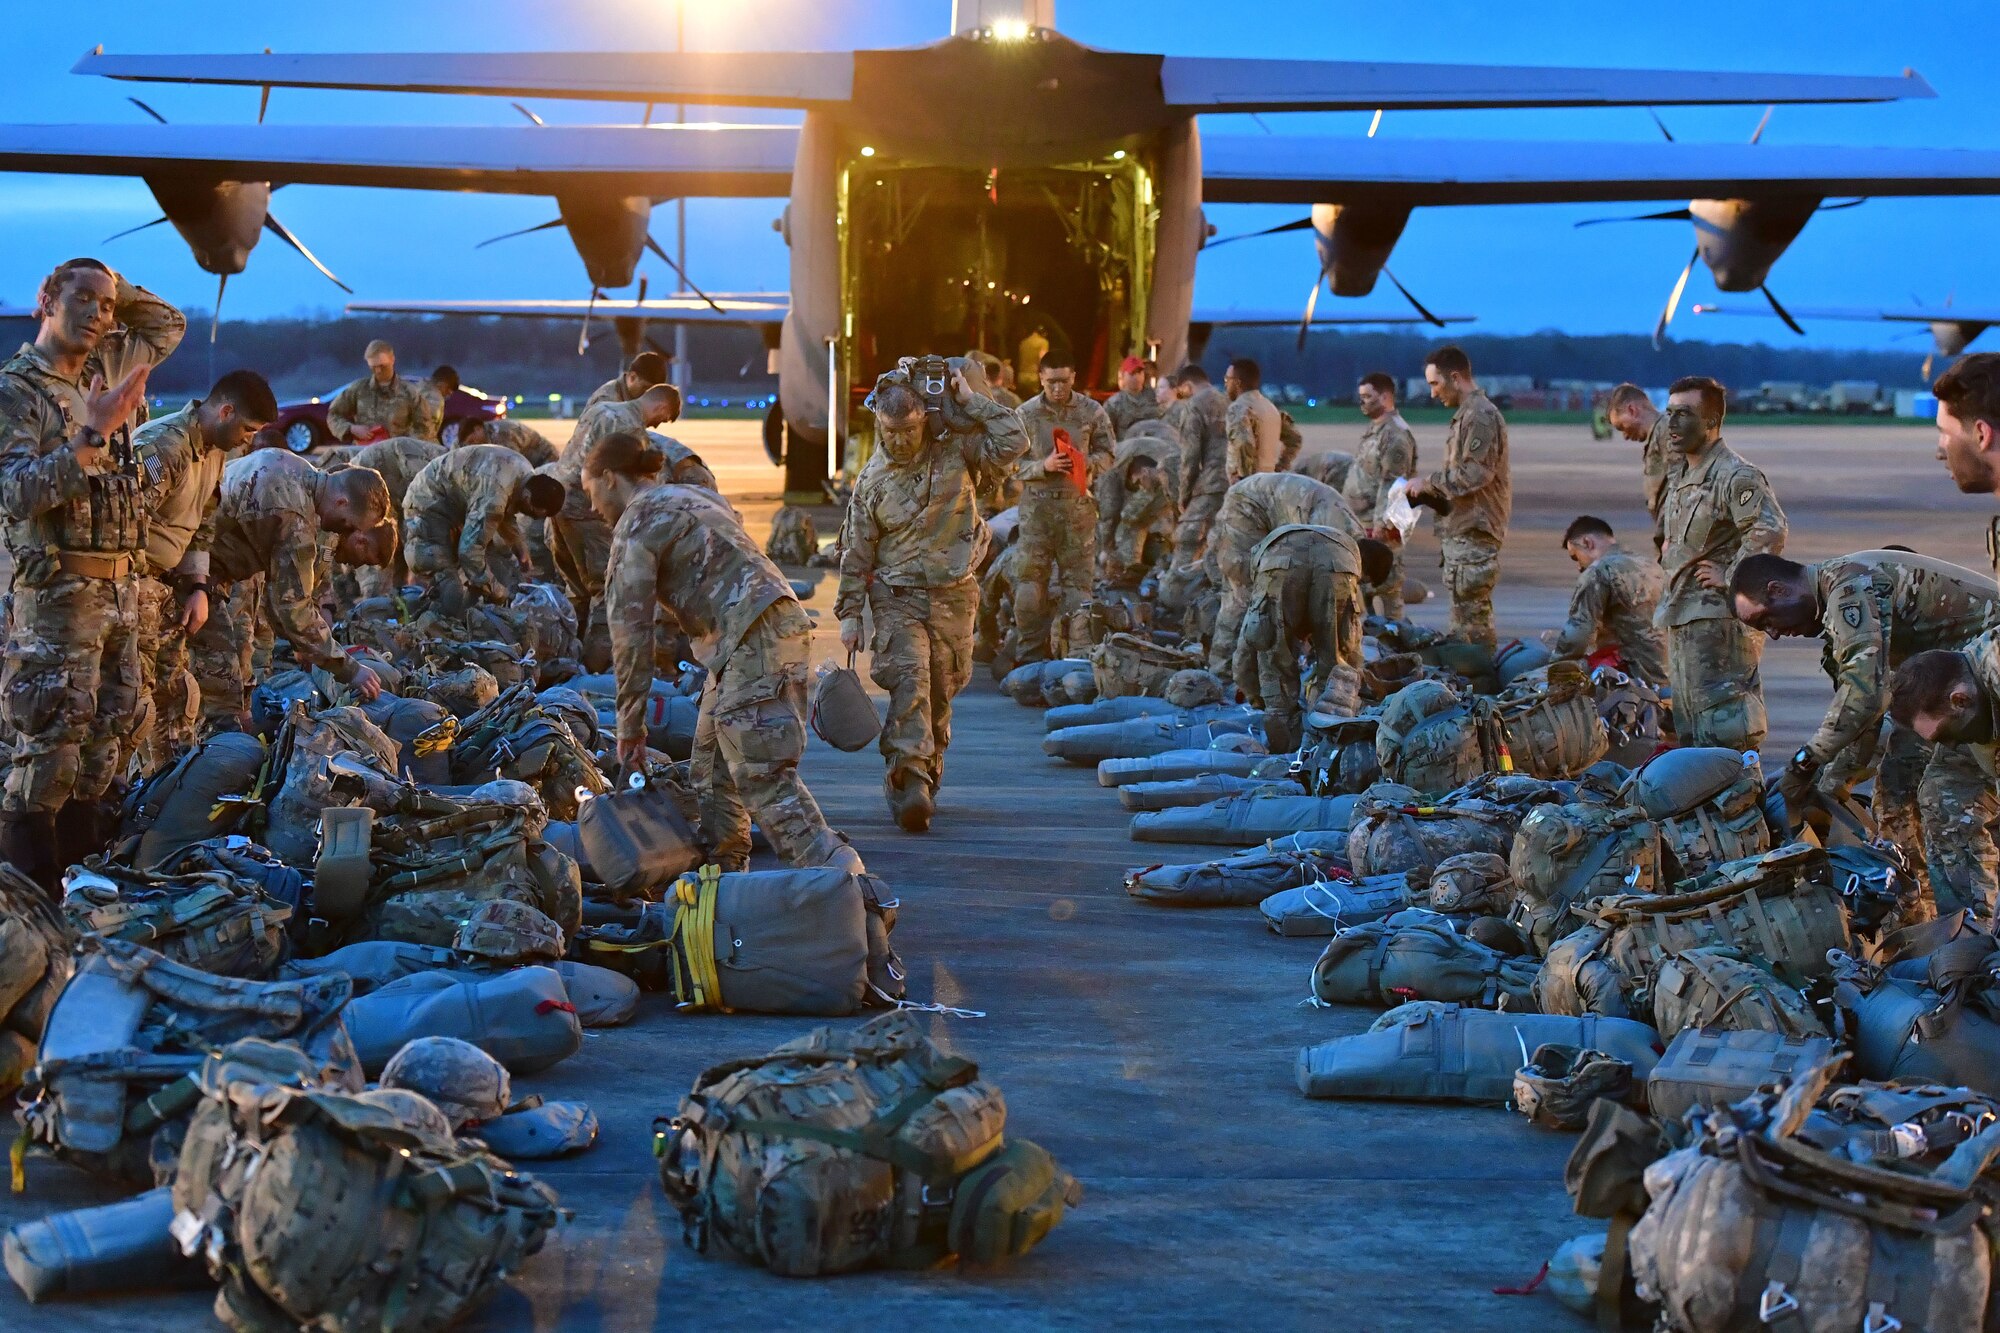 Soldiers from the 4th Brigade Combat Team (Airborne), 25th Infantry Division, at Joint Base Elmendorf-Richardson, Alaska, wait to board a C-130J Super Hercules during the joint forcible entry and airborne assault.